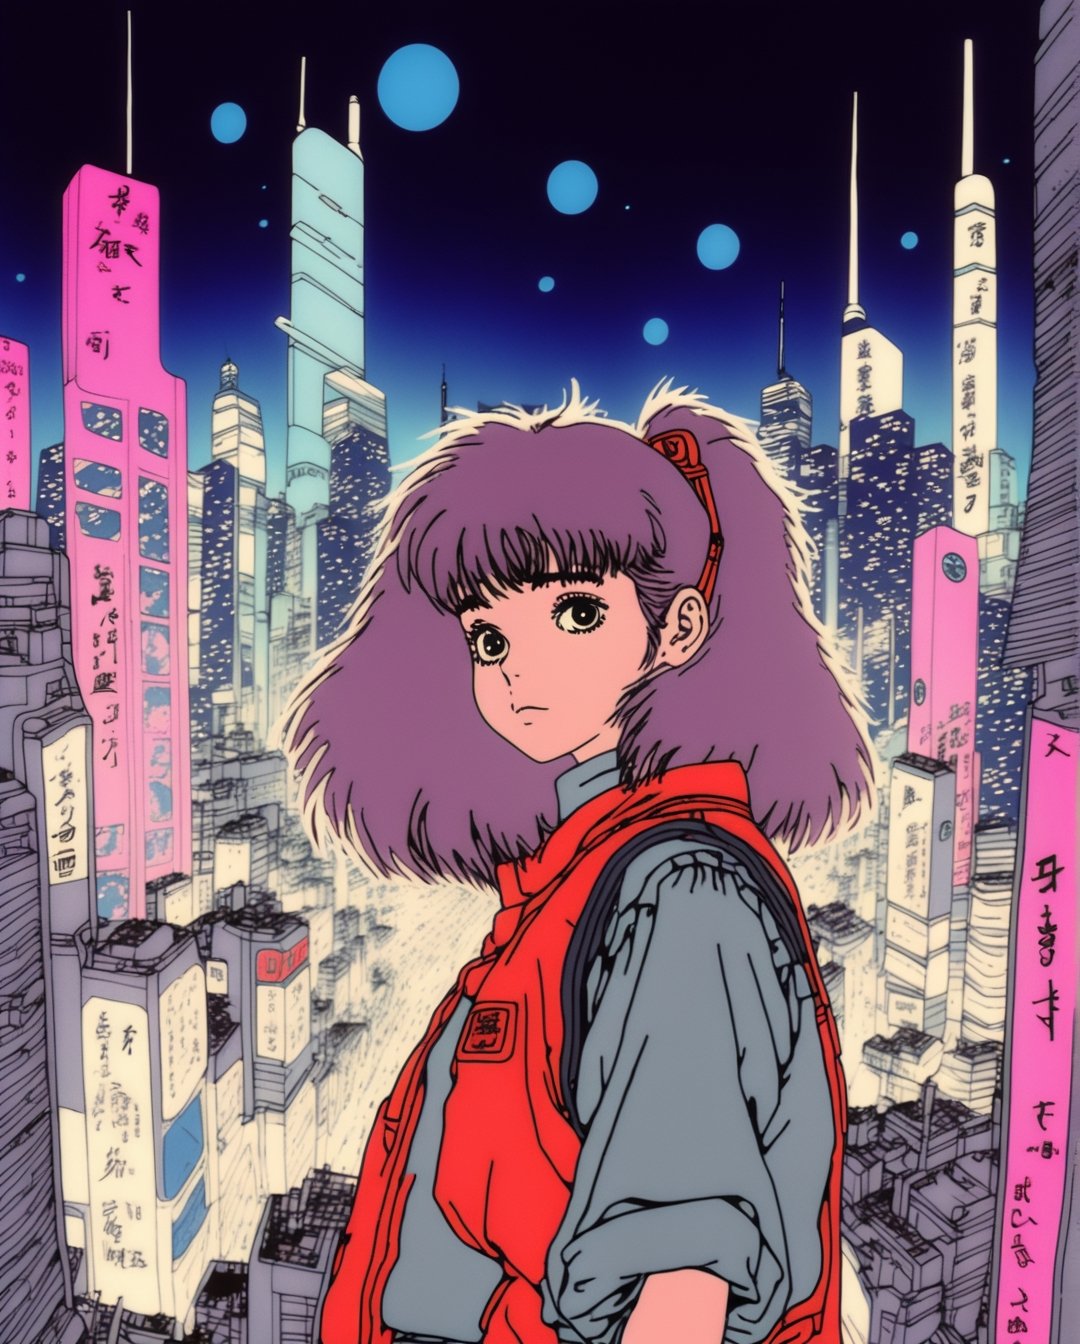 80s aesthetic that includes anime, beautiful girl lookin above with futuristic heather clothes in Tokyo in 1980, light indian ink, Akira distopic city, illustration by Hayao Miyazaki